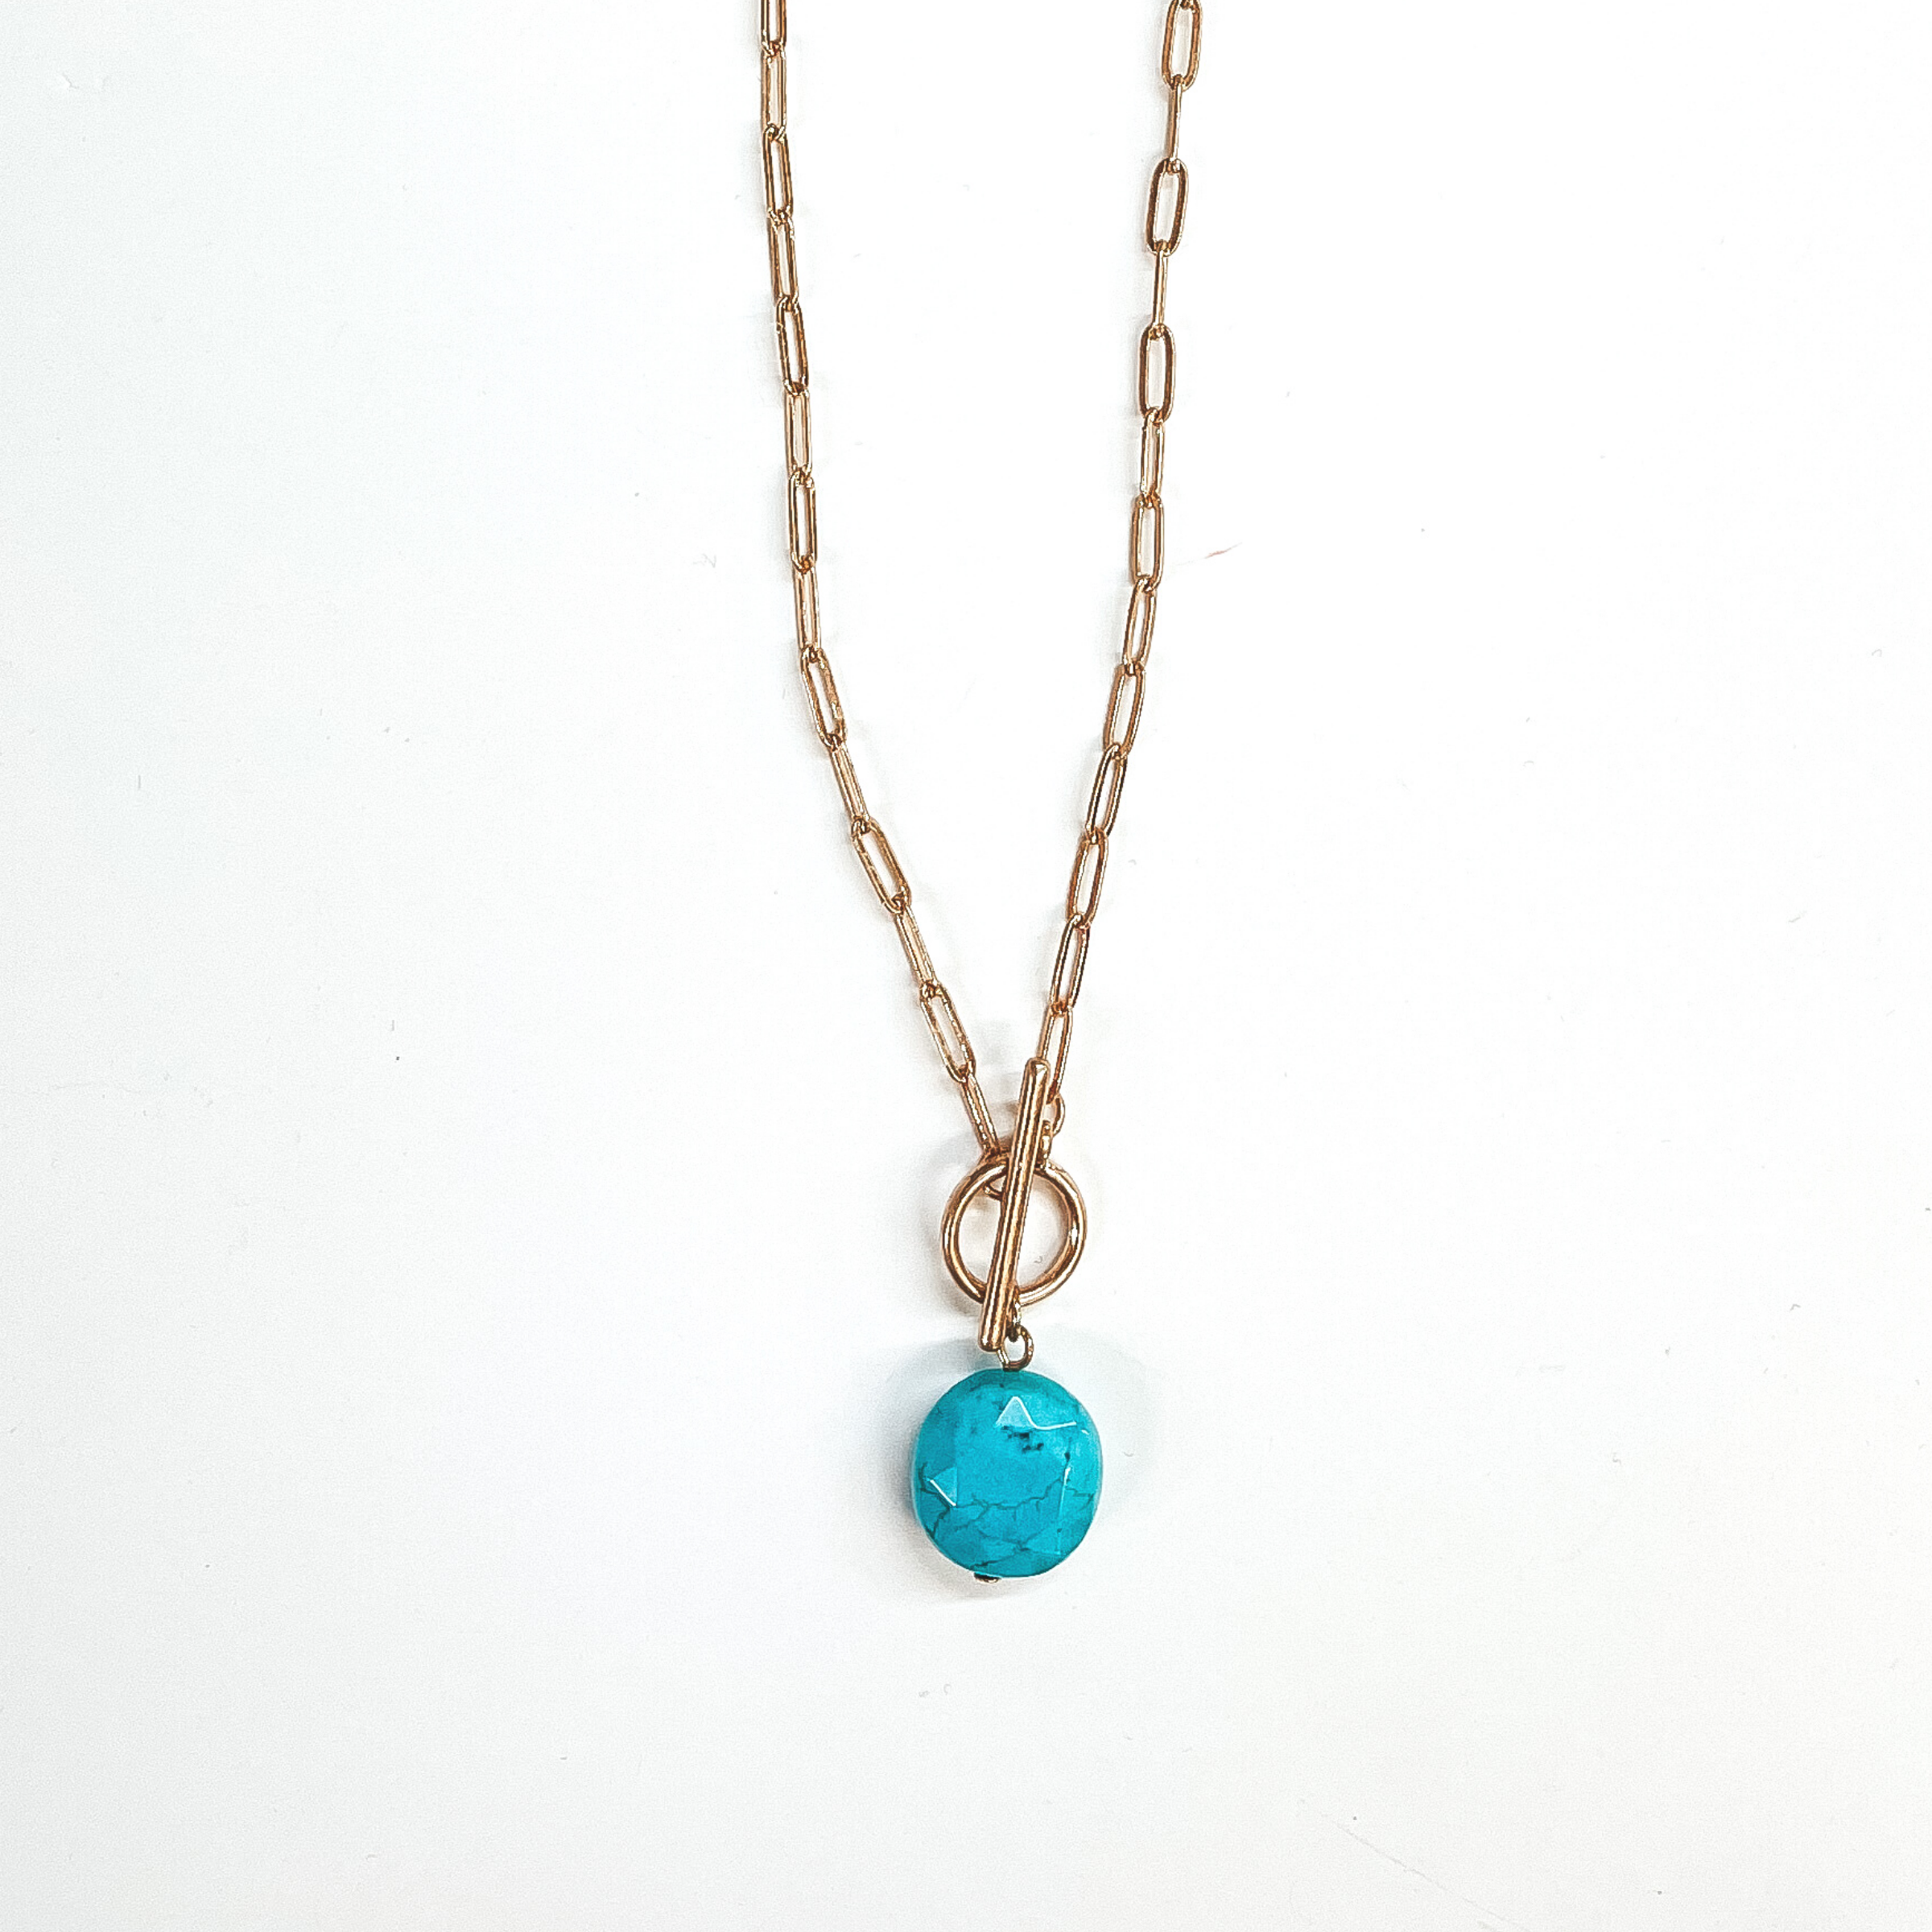 Gold paperclip chain necklace with toggle clasp and  natural stone circle pendant in turquoise. Taken on  a white background.